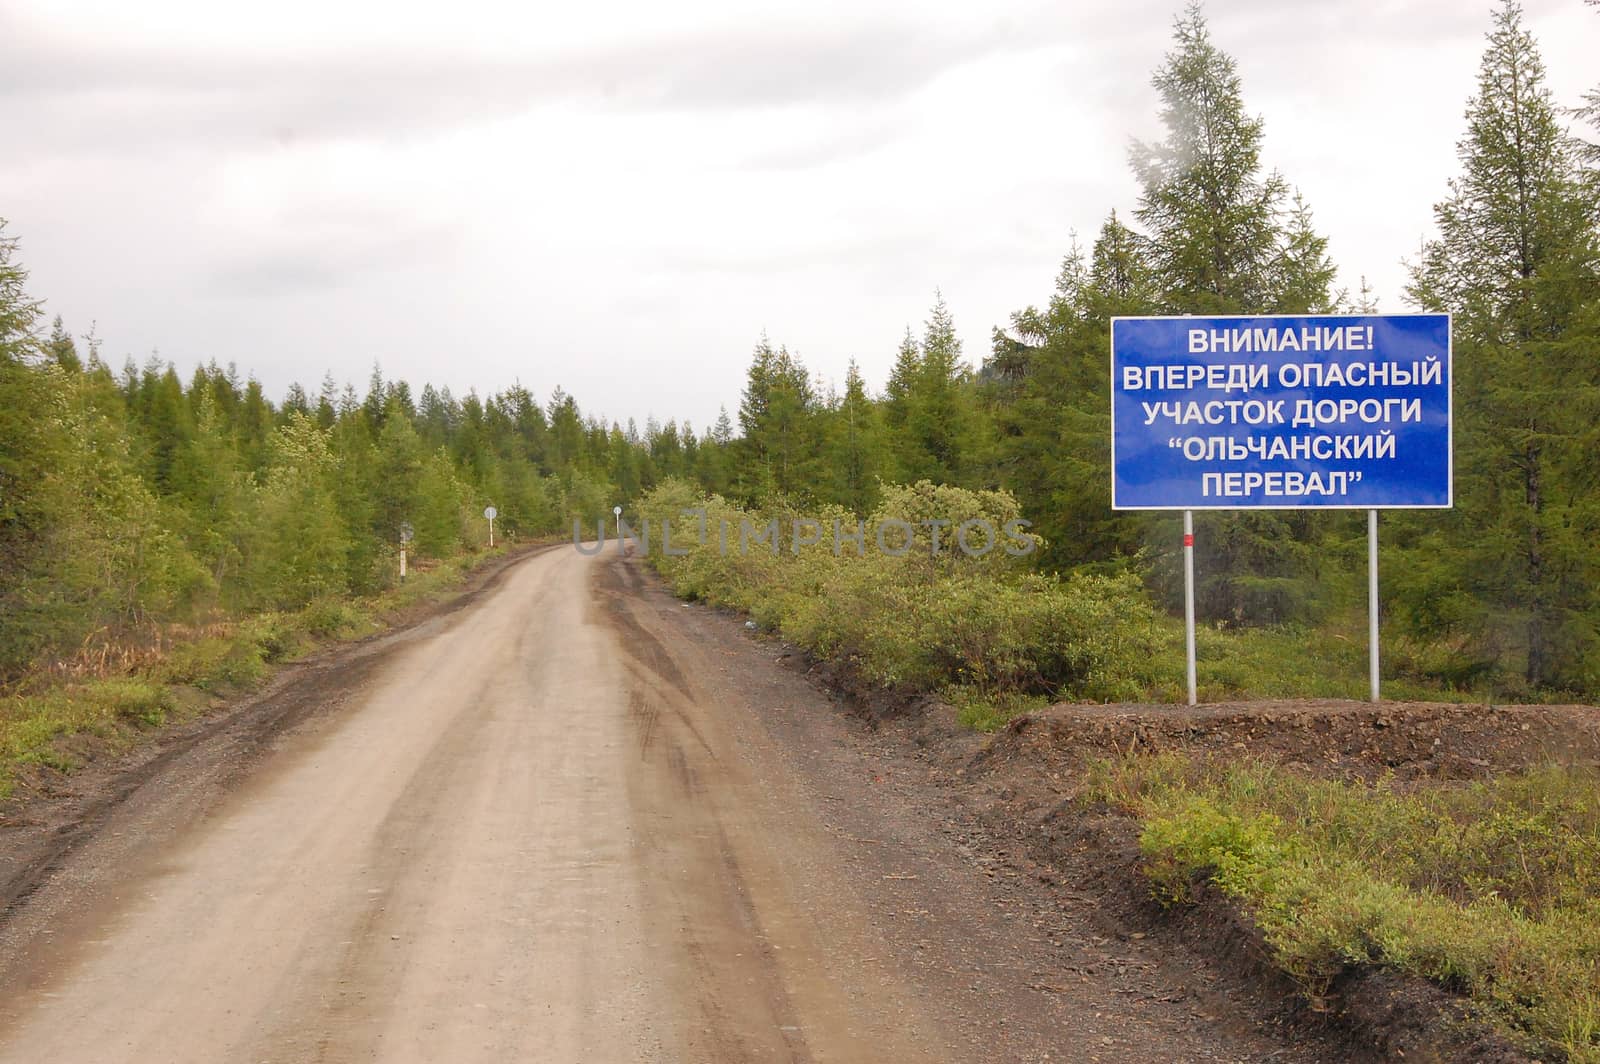 Road sign at gravel road Kolyma highway outback Russia by danemo